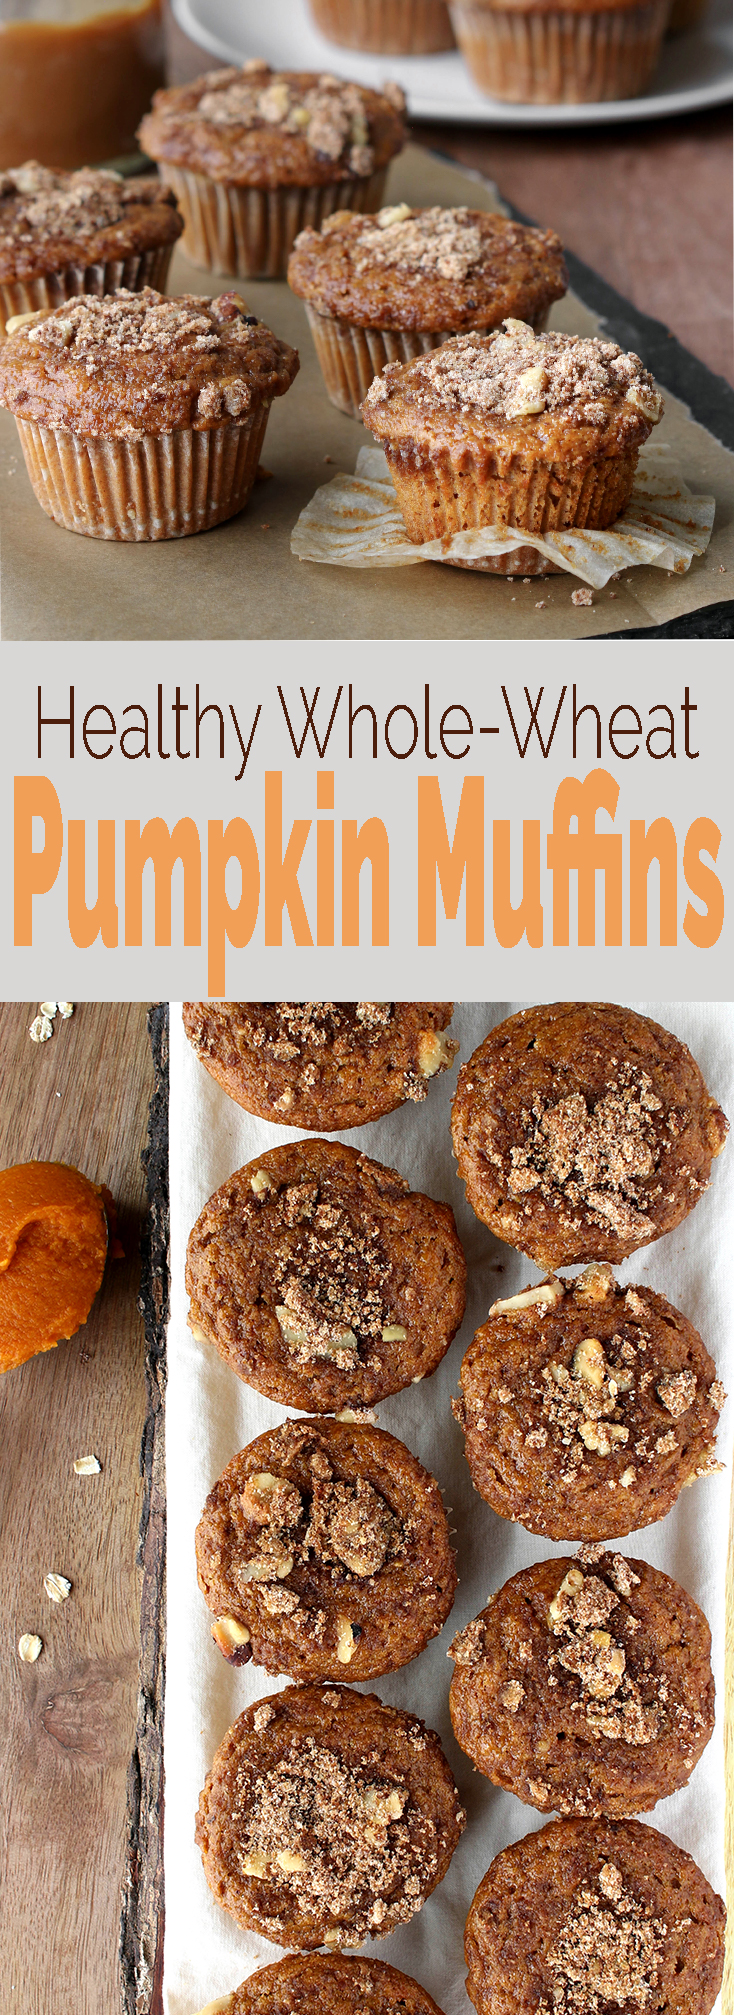 One bowl Whole Grain Pumpkin Muffins with a secret healthy ingredient: yogurt! Healthy, easy to make and seriously satisfying.